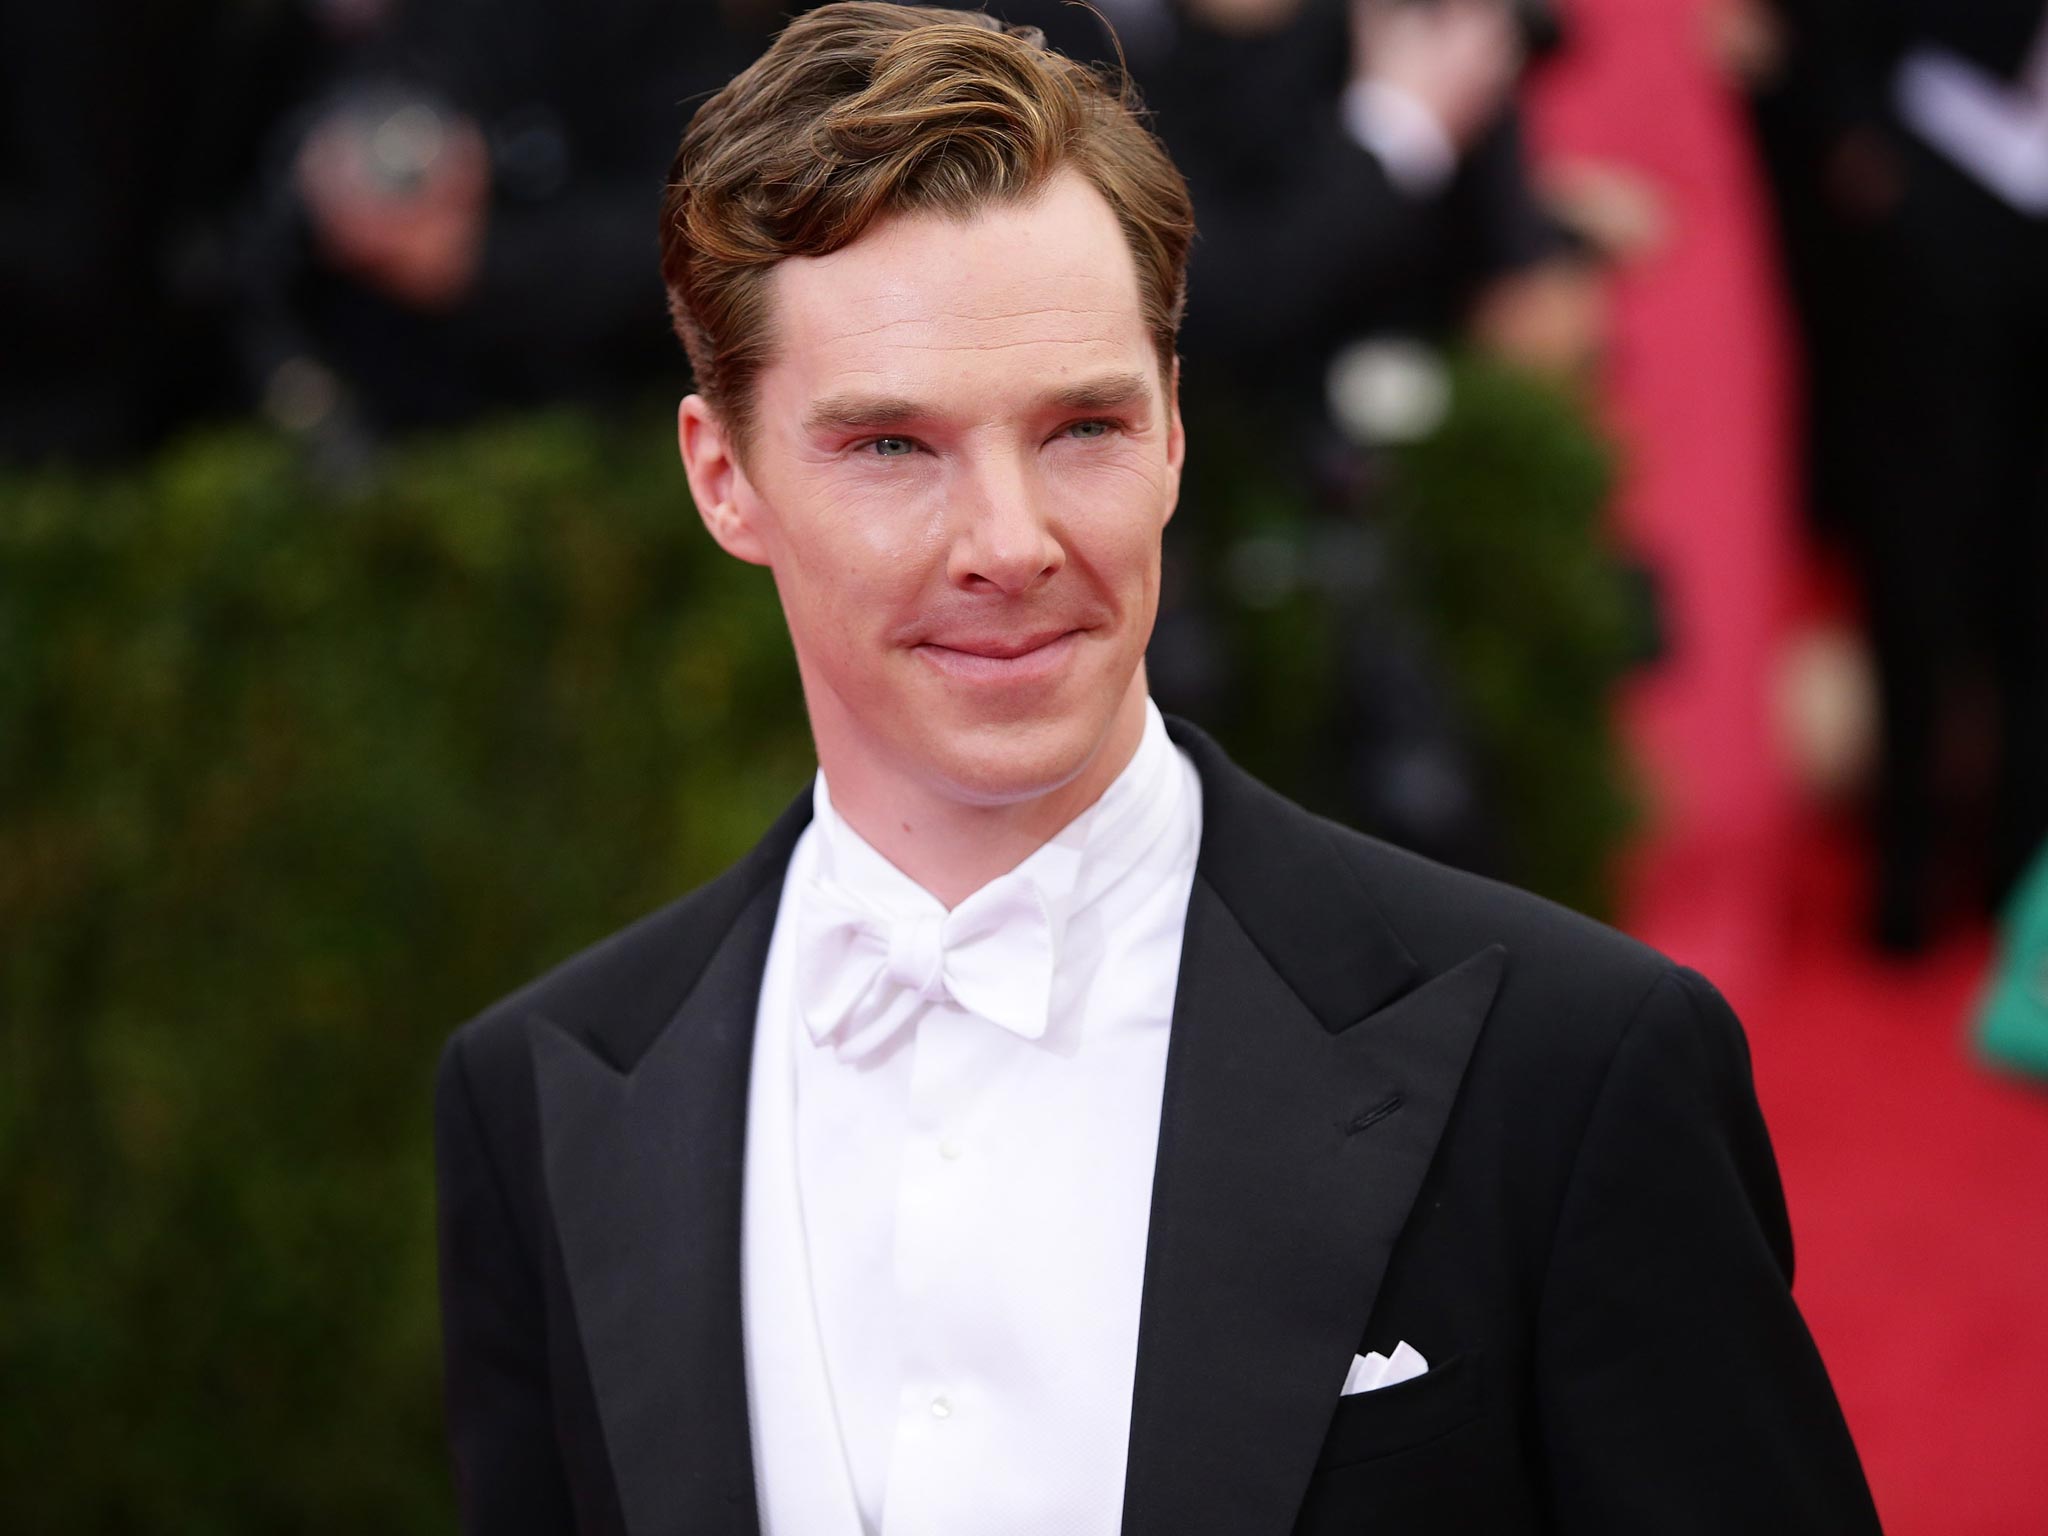 Benedict Cumberbatch will attend Comic-Con 2014 to promote Penguins of Madagascar